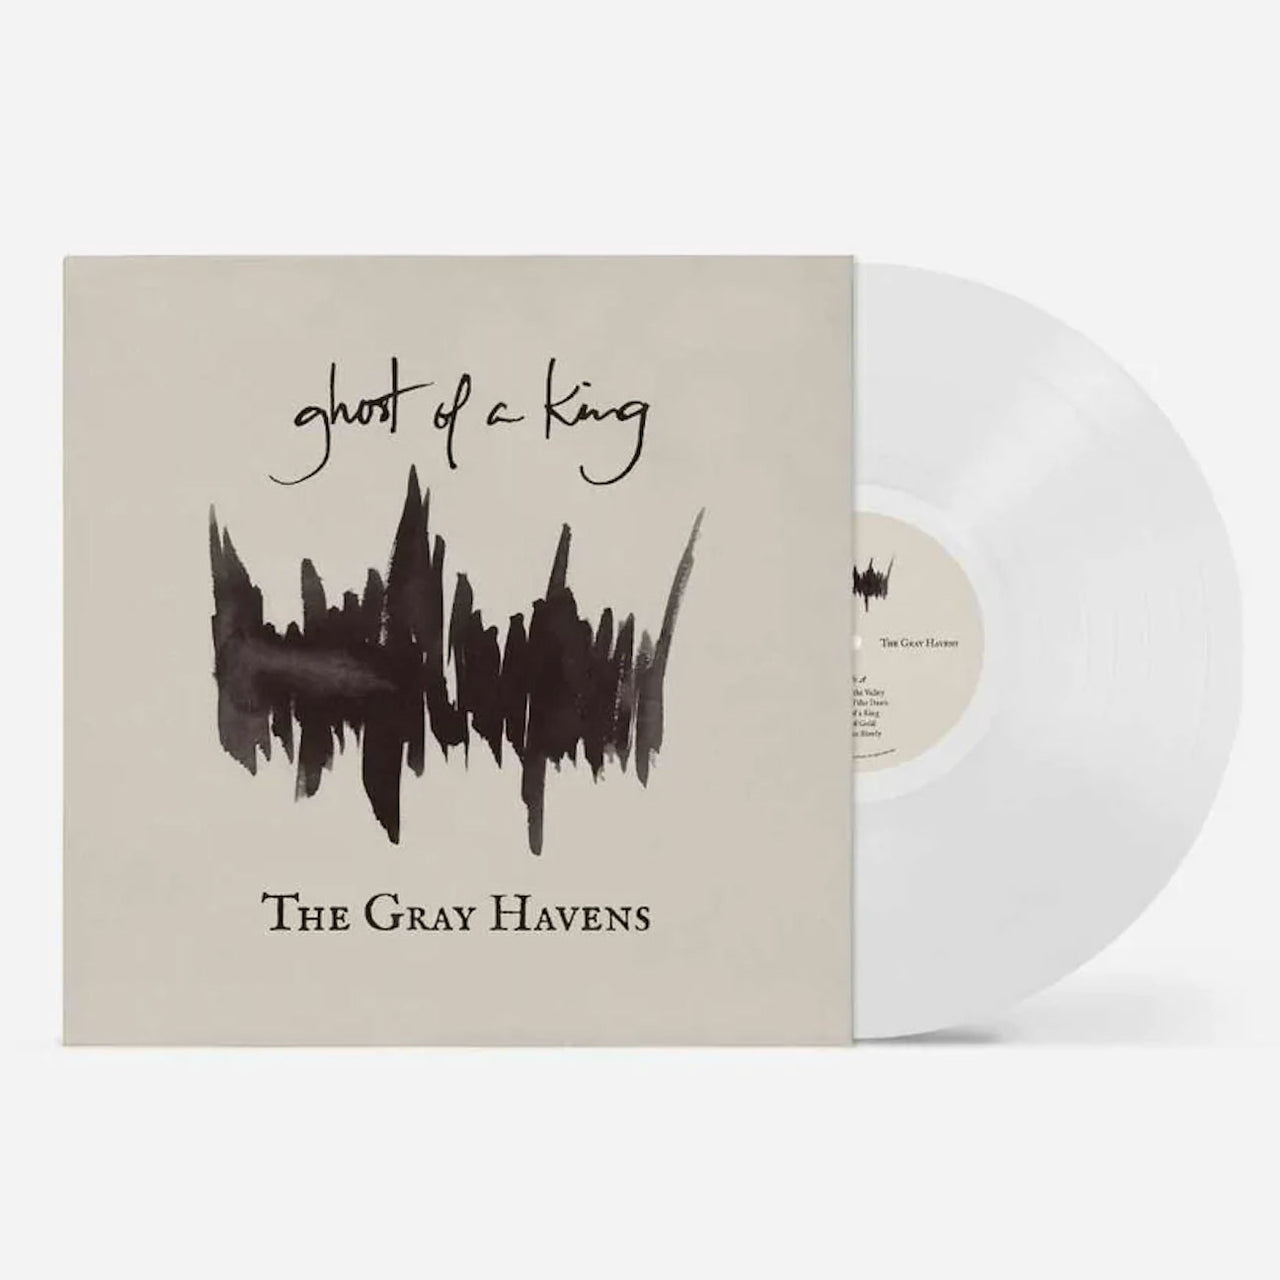 The Gray Havens: Ghost Of A King Vinyl LP (Clear)